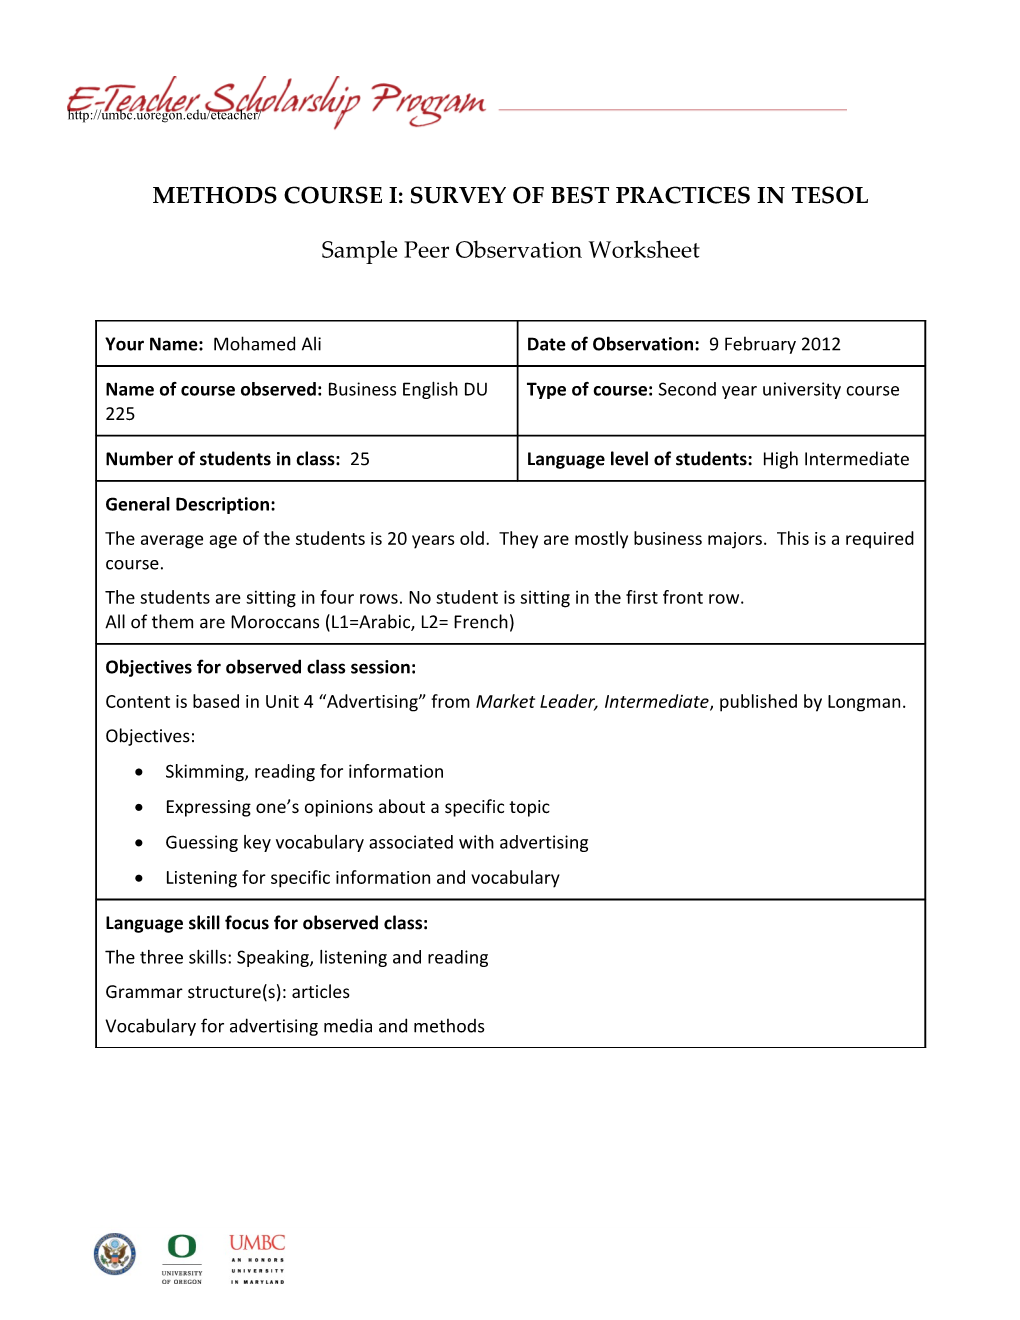 Methods Course I: Survey of Best Practices in Tesol